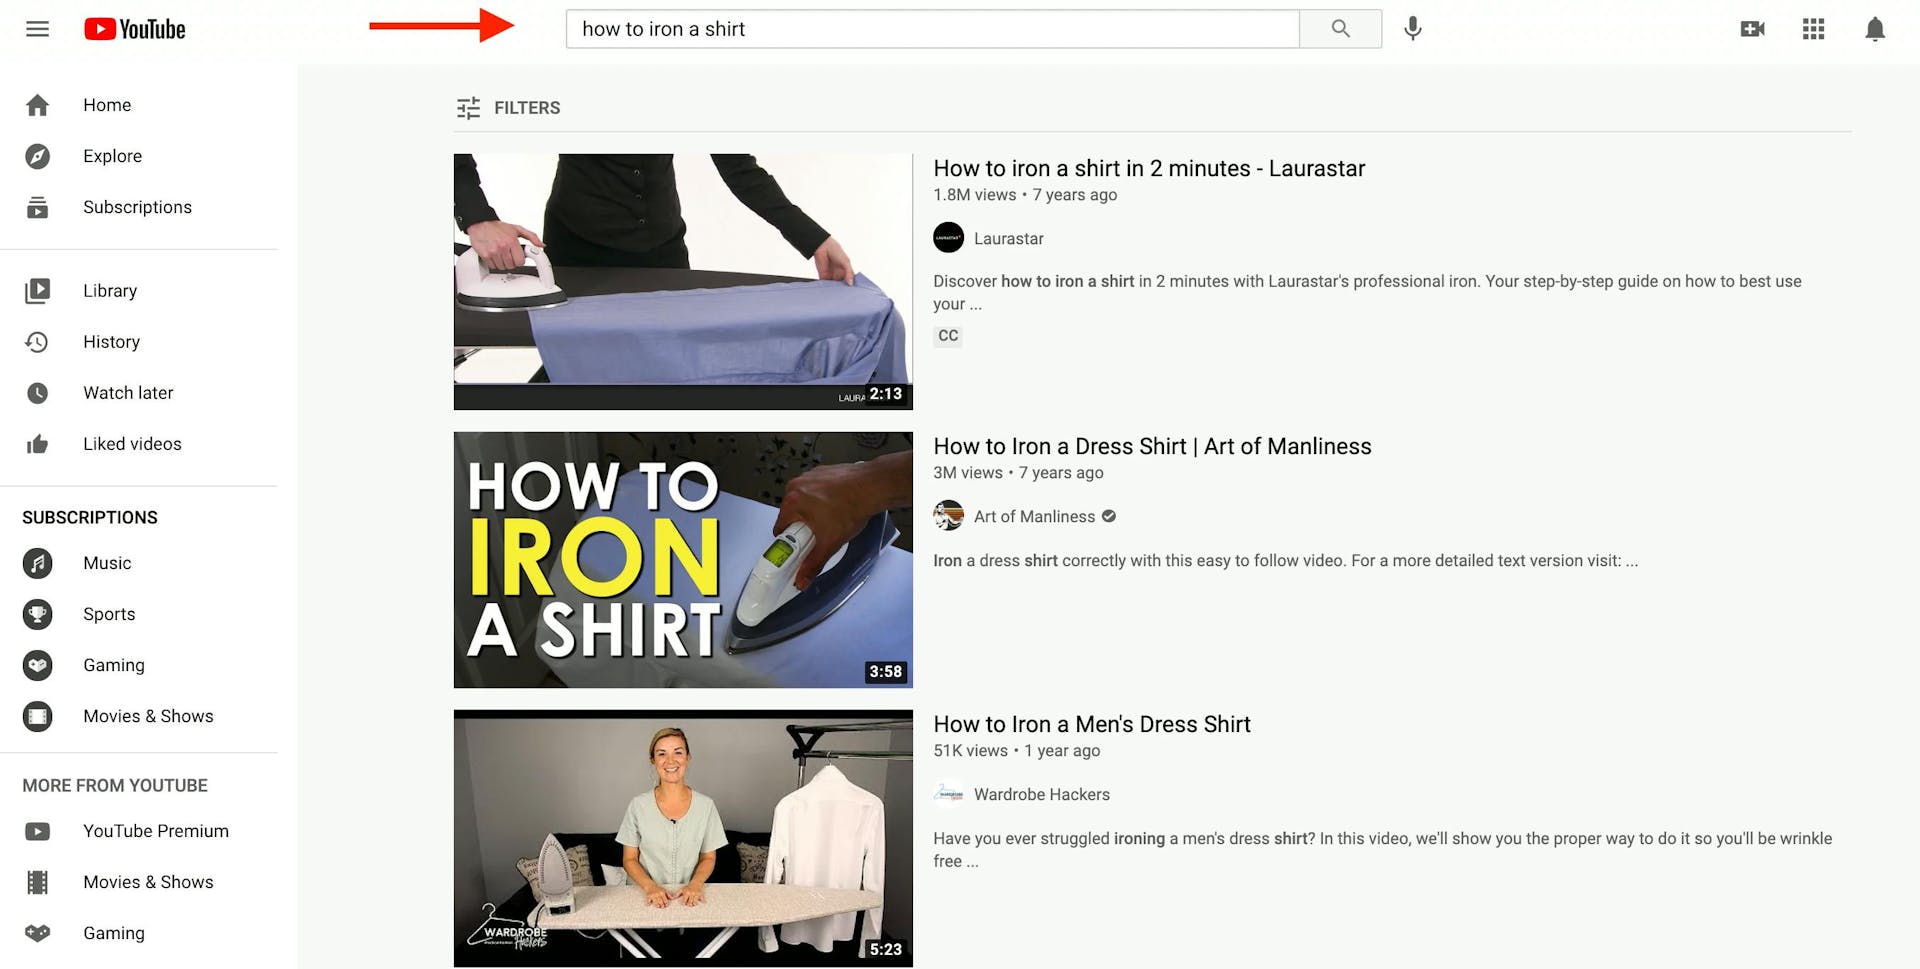 YouTube organic search results for the keyword "how to iron a shirt"